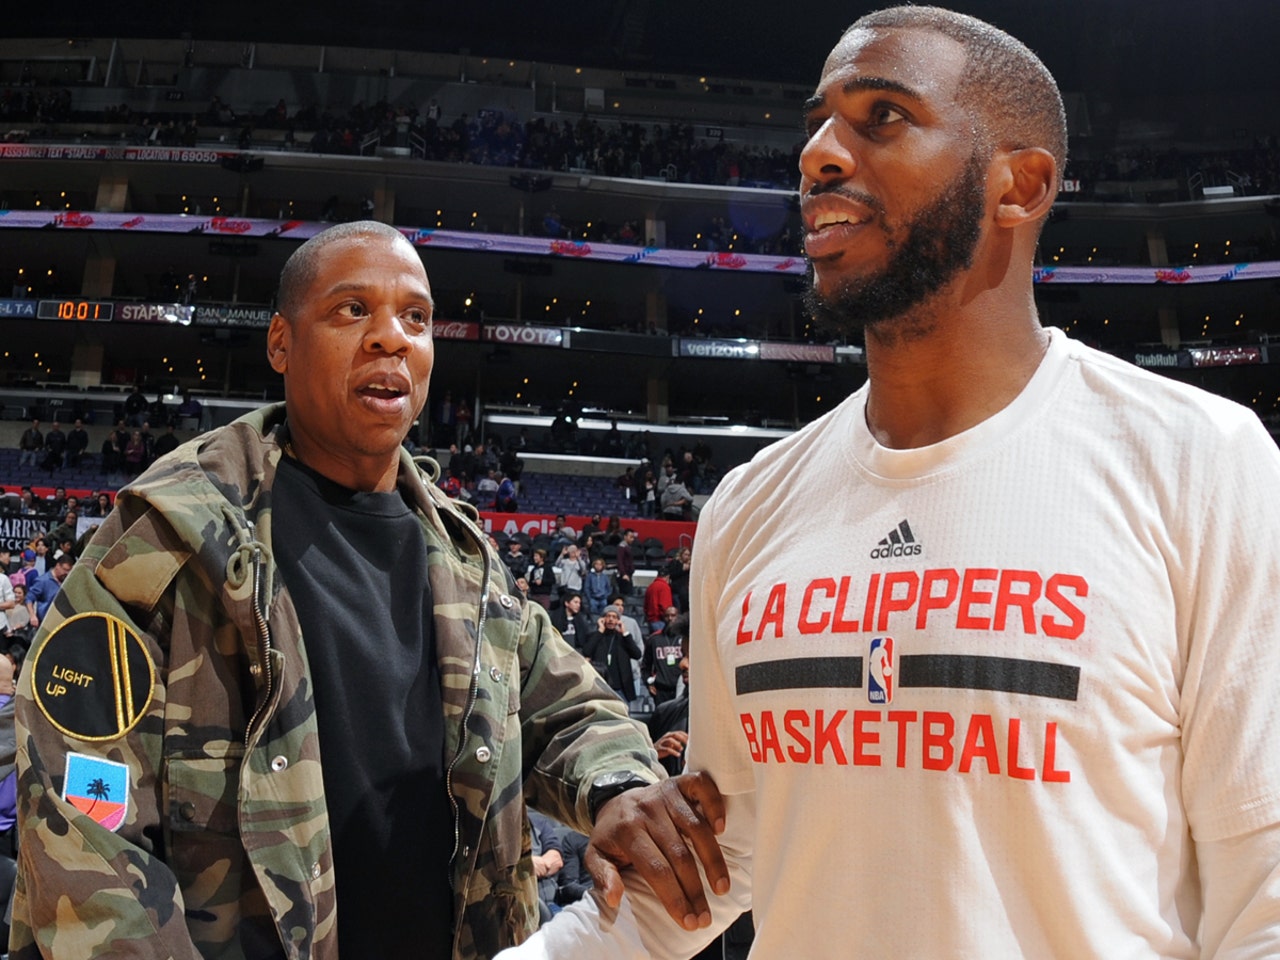 Chris Paul can't fool Jay Z when it comes to the Clippers' plays